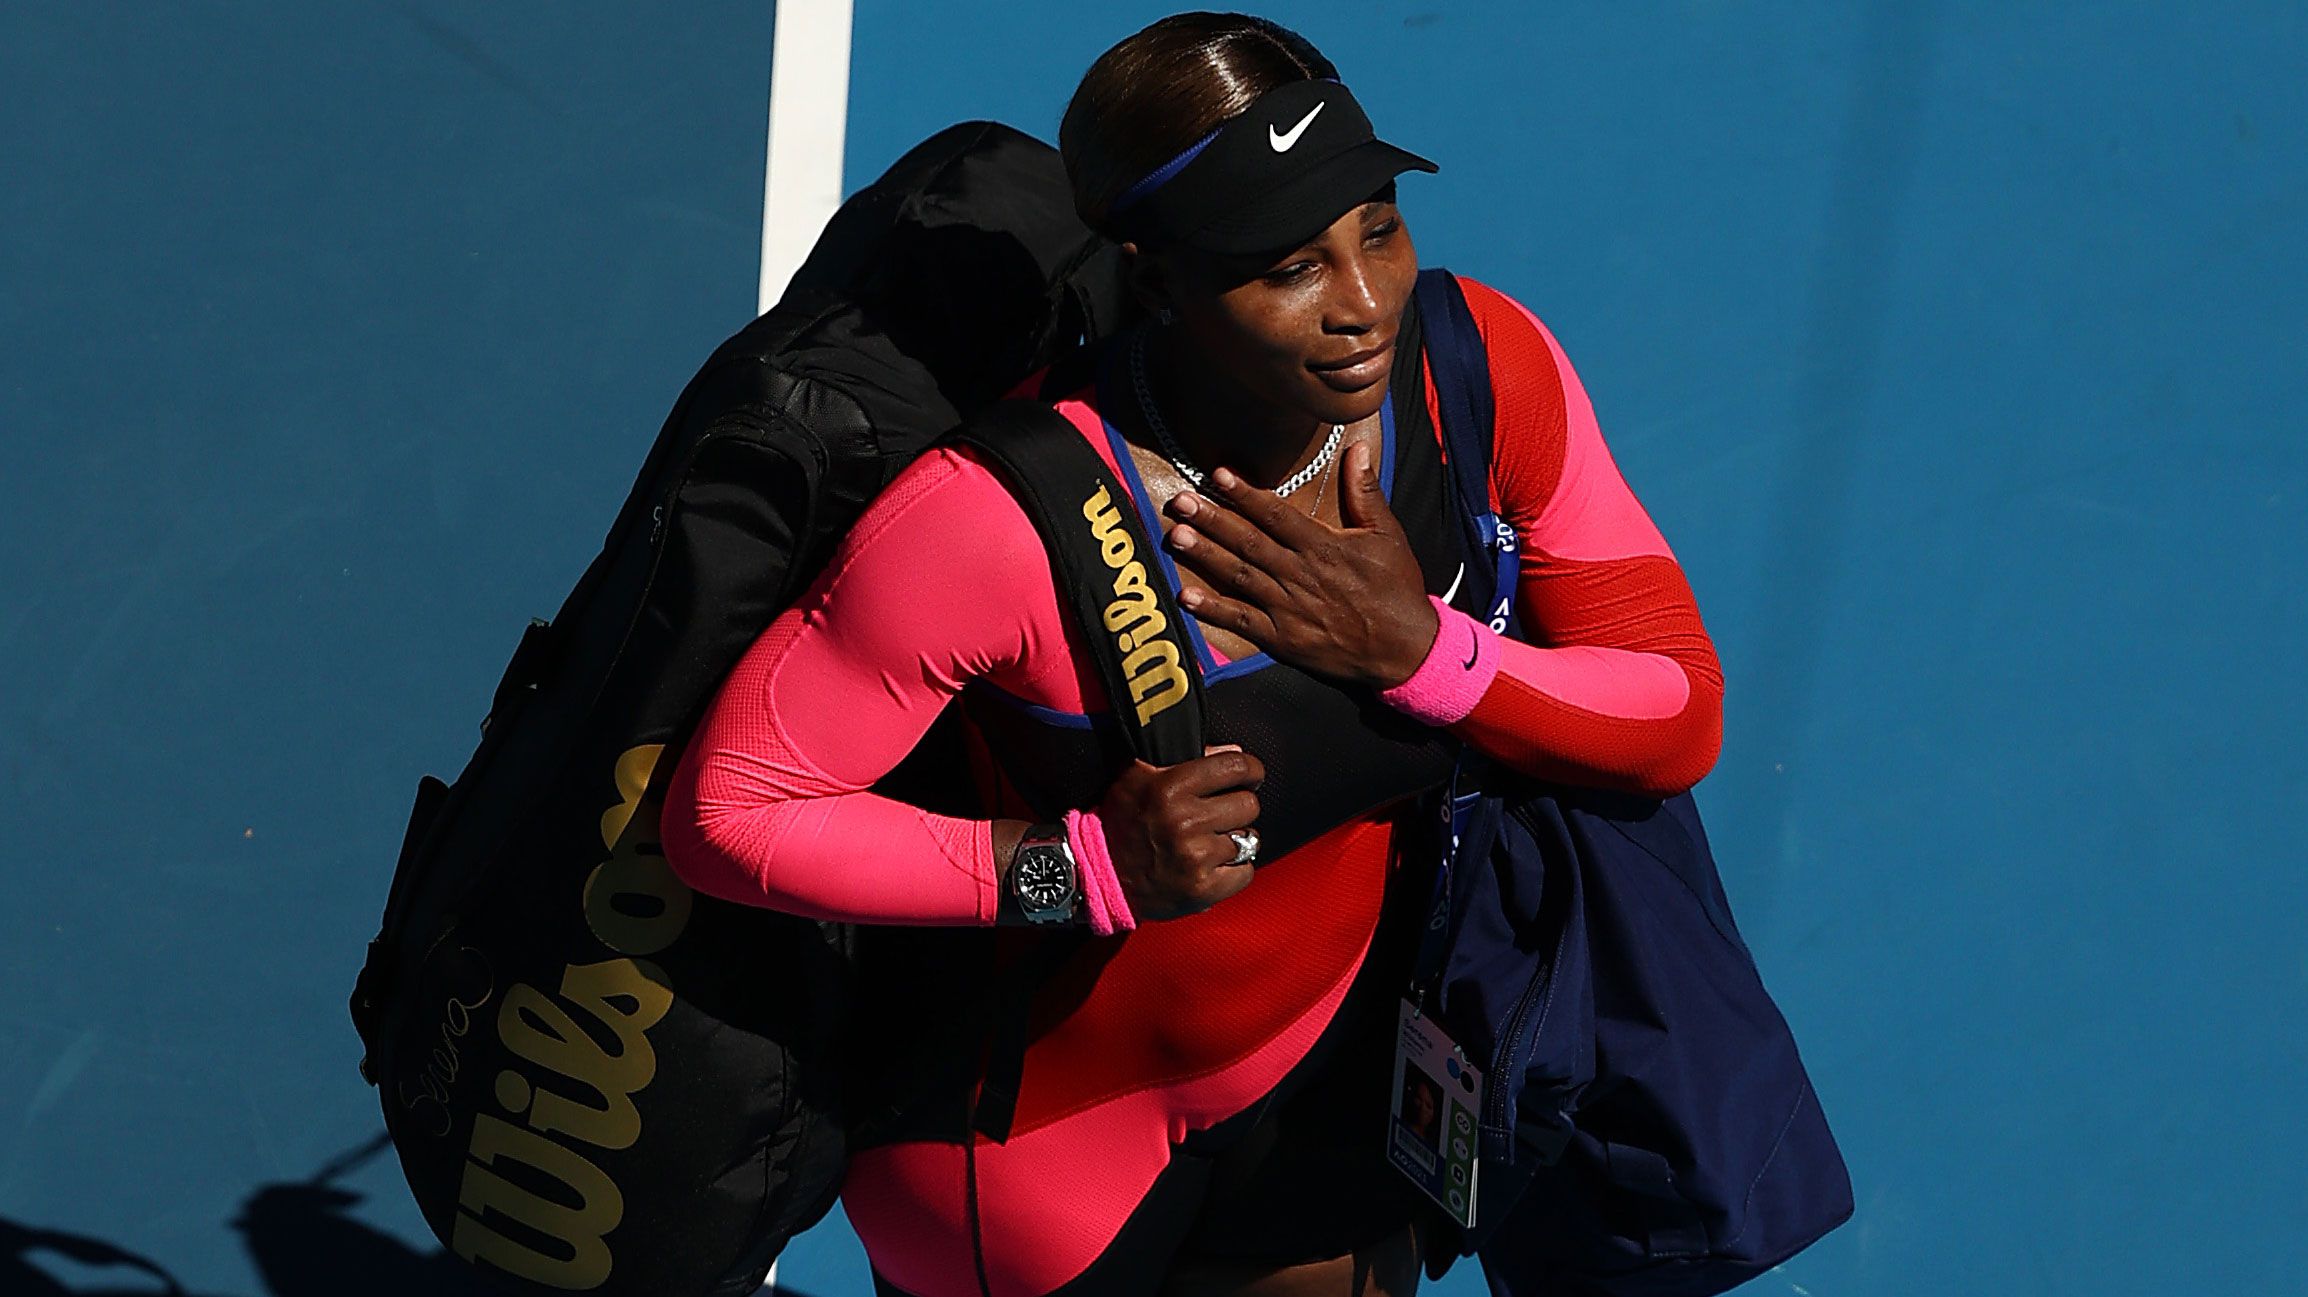 Serena Williams says an emotional farewell to the Australian Open crowd.